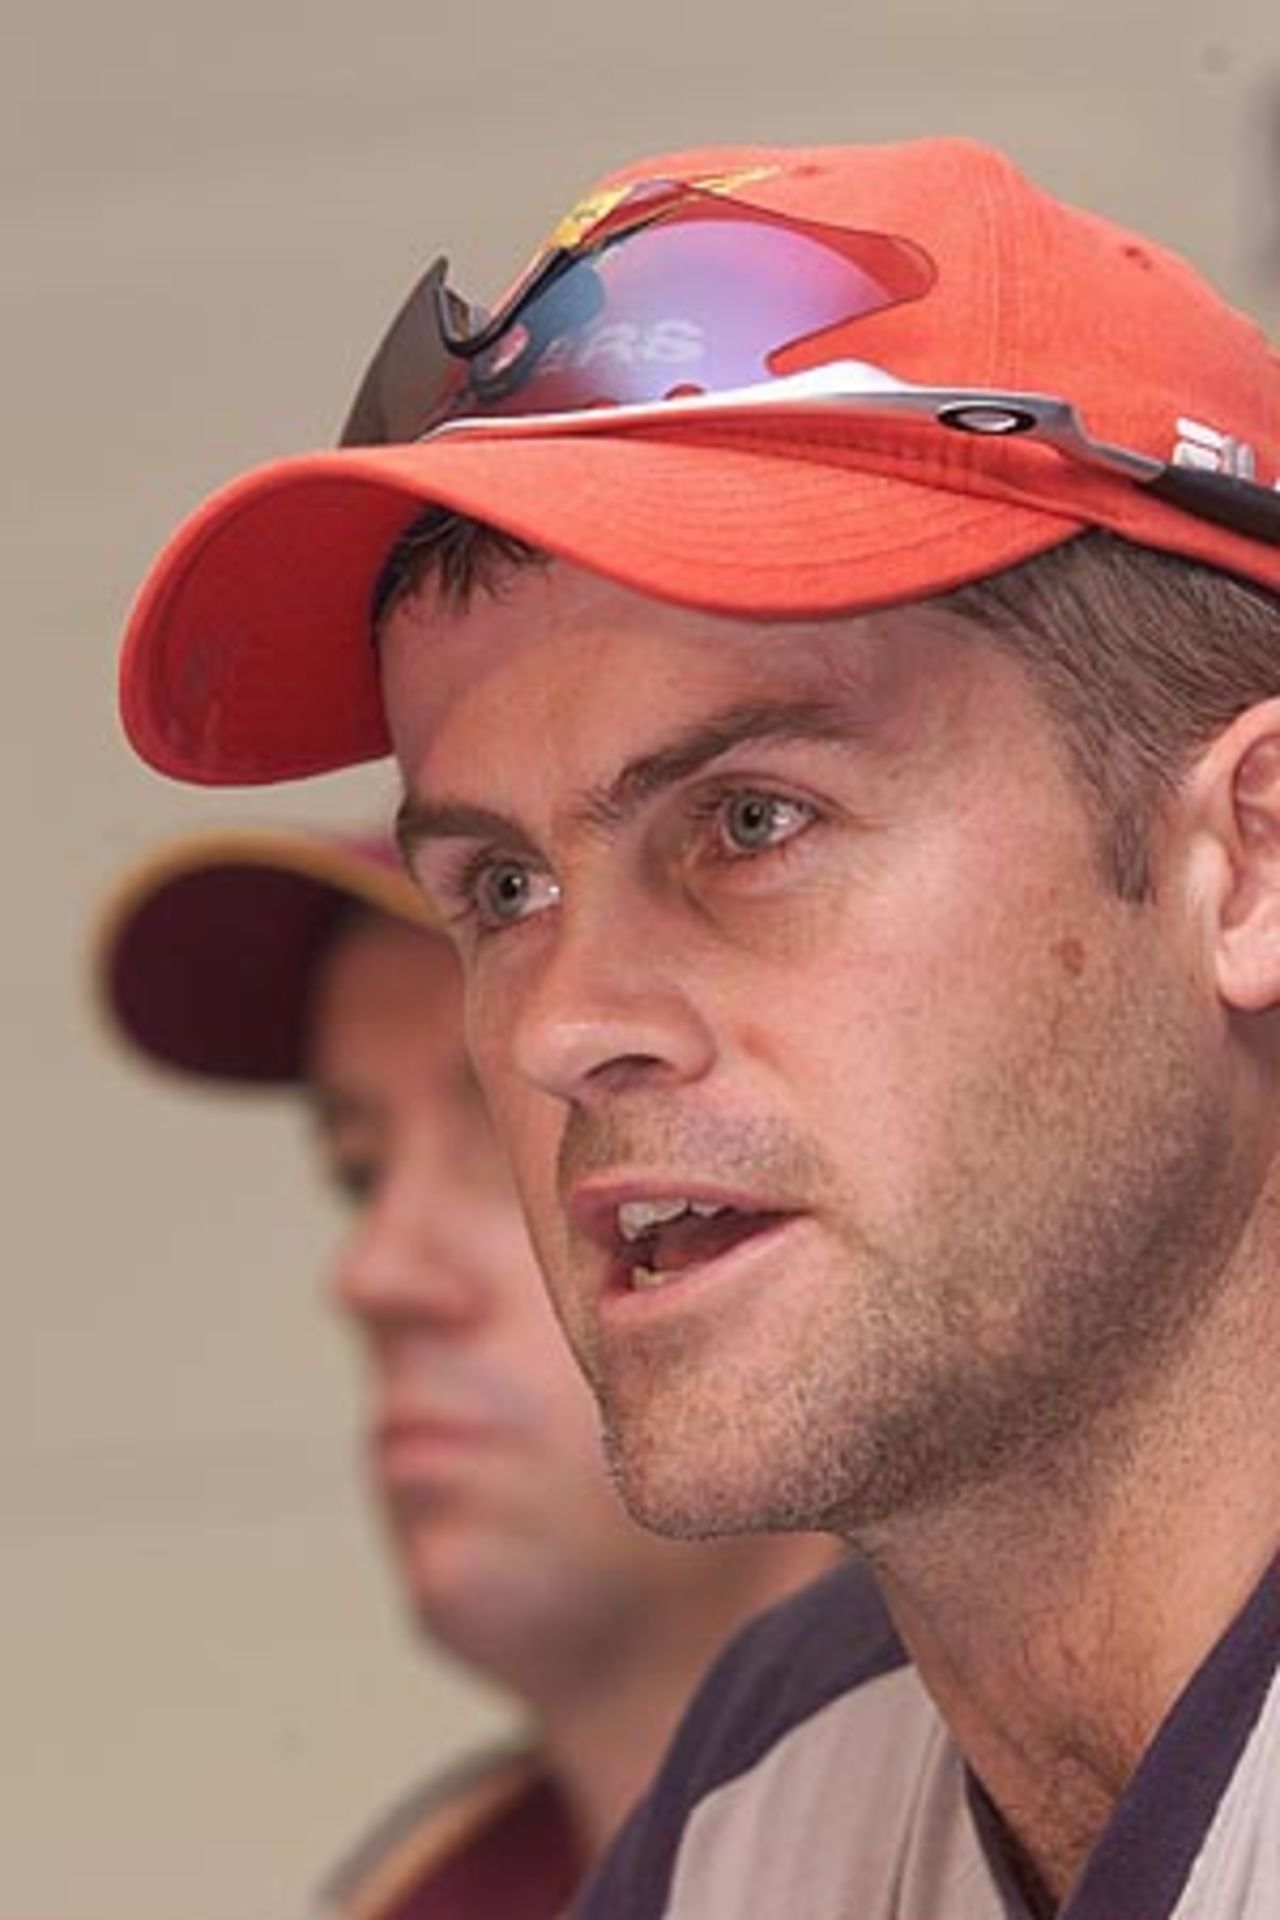 21 Mar 2002: Jamie Cox of the Tigers speaks with the press during the Captains Press Conference held in preperation for the Pura Cup Final to be played between the Queensland Bulls and the Tasmania Tigers at the Gabba, Brisbane, Australia.